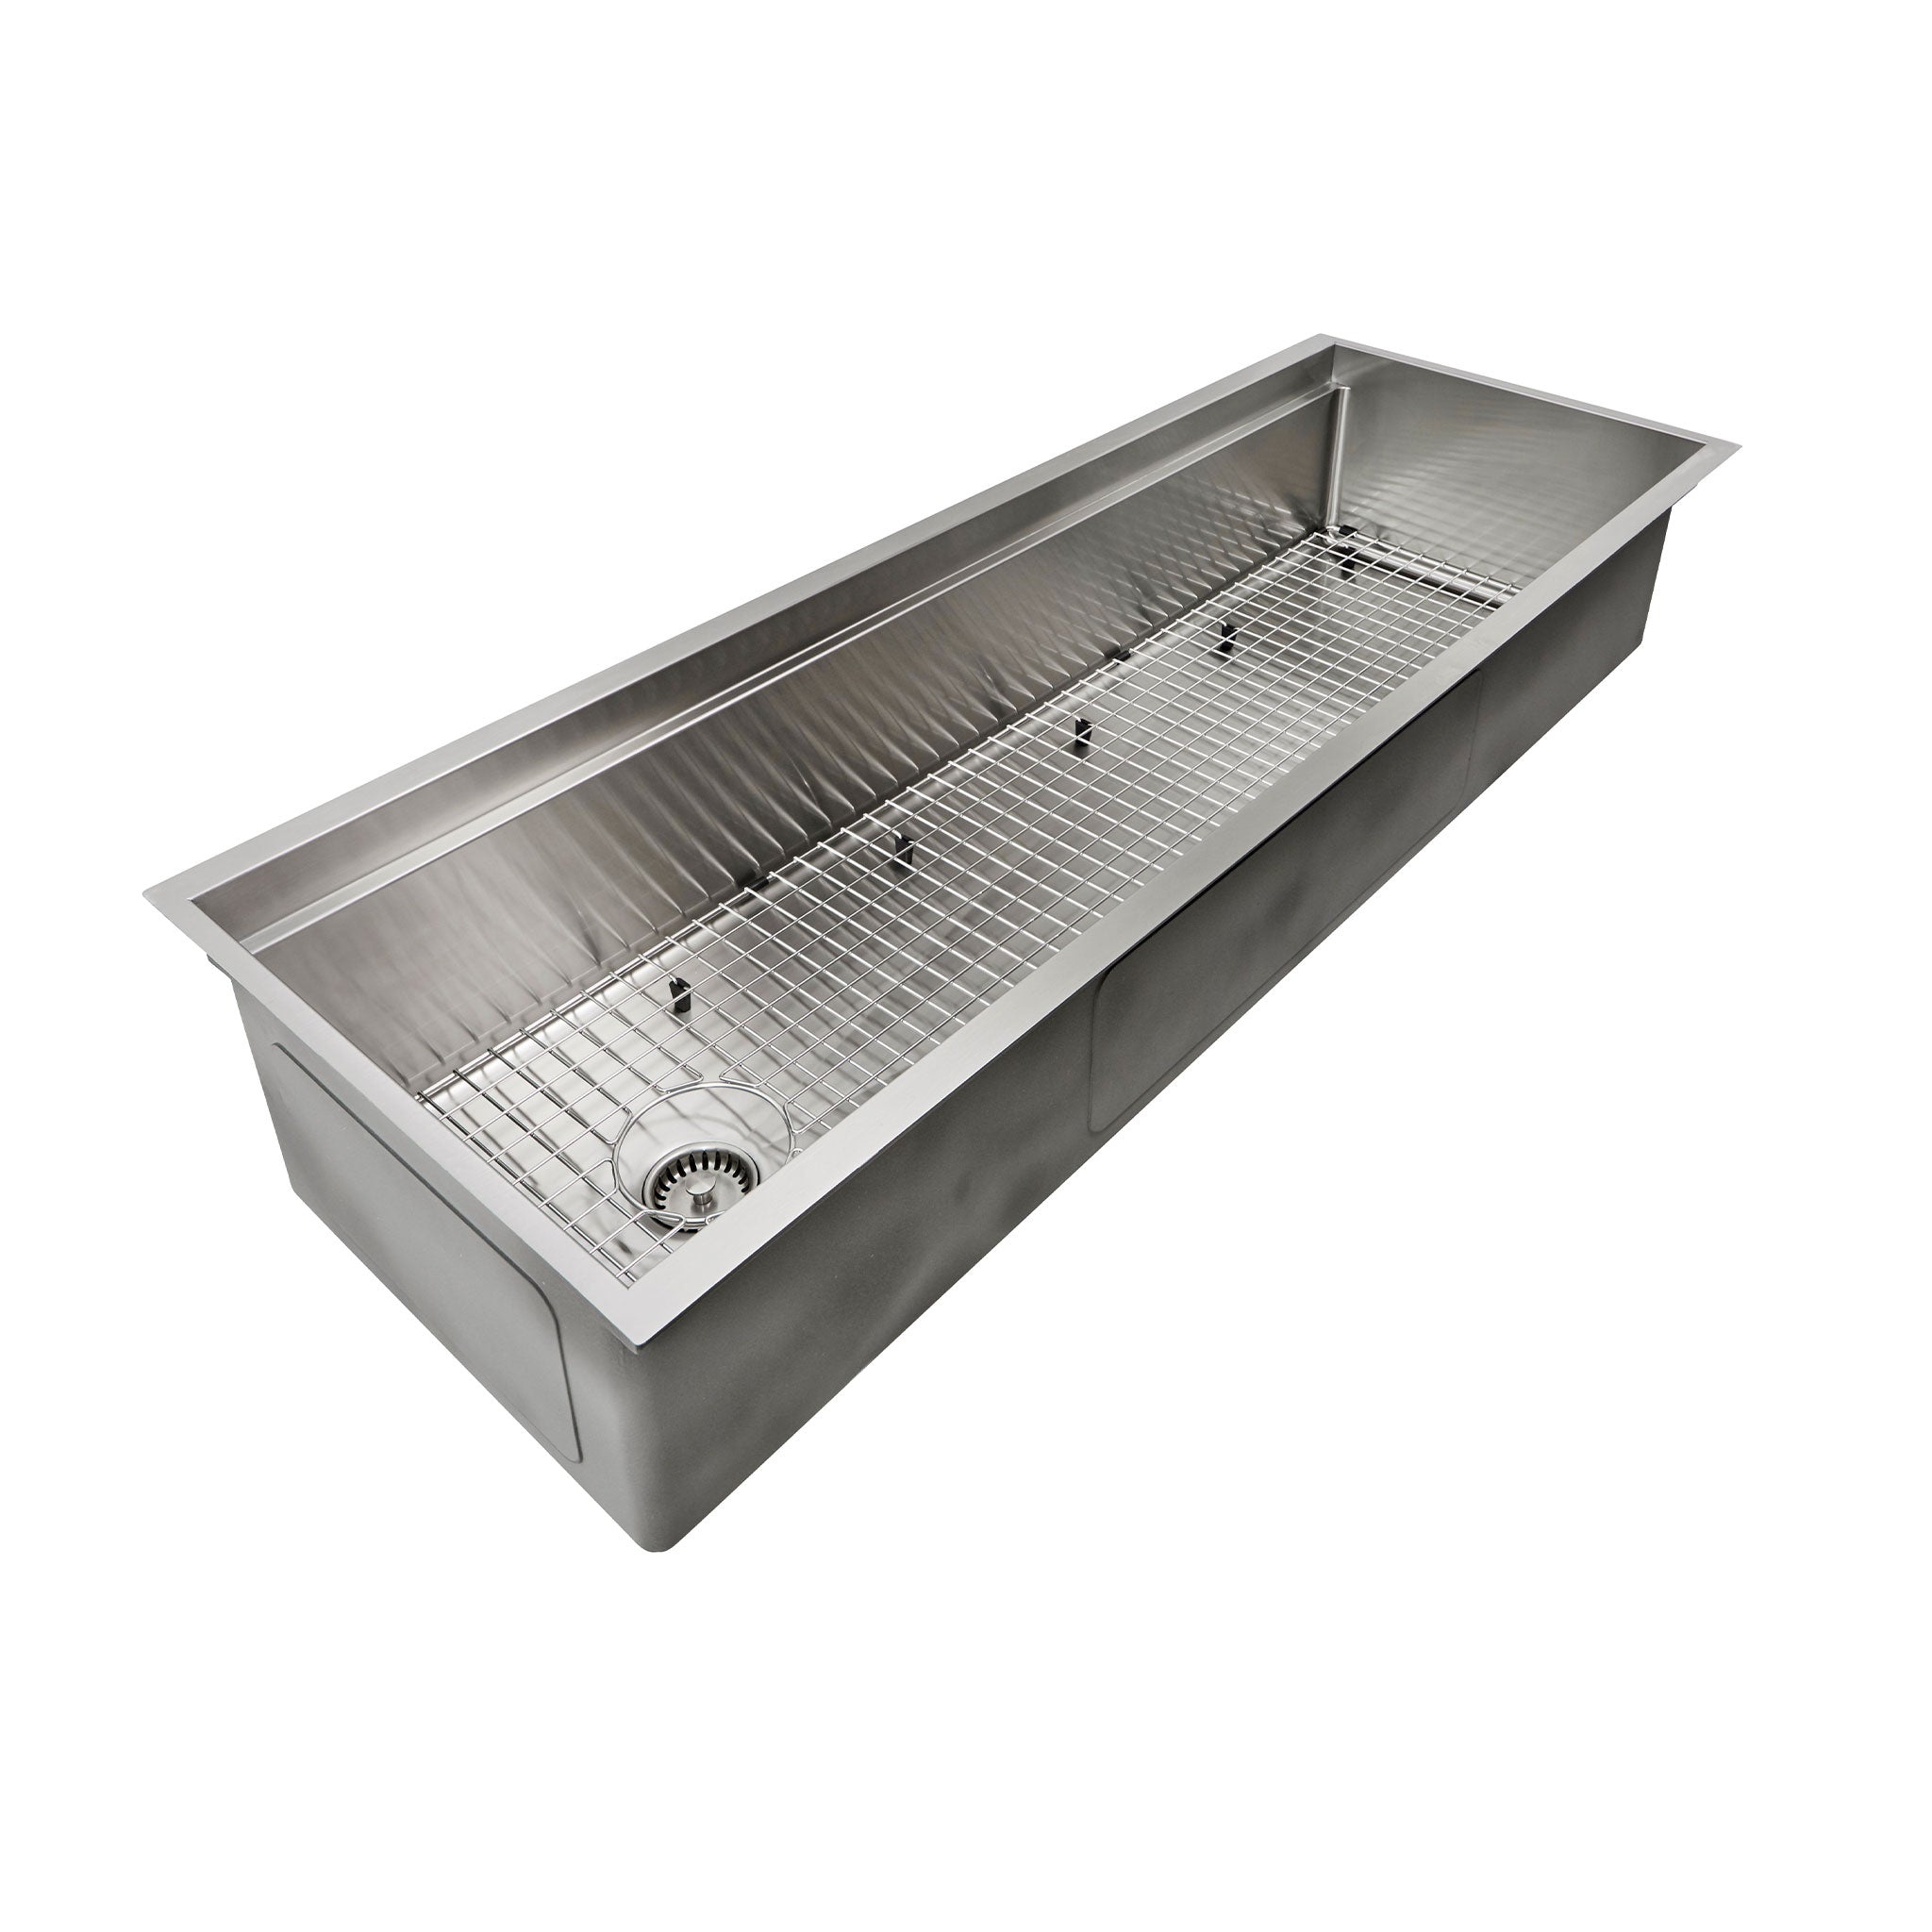 5 foot single basin sink with offset seamless drain and built in ledge for sink accessories 